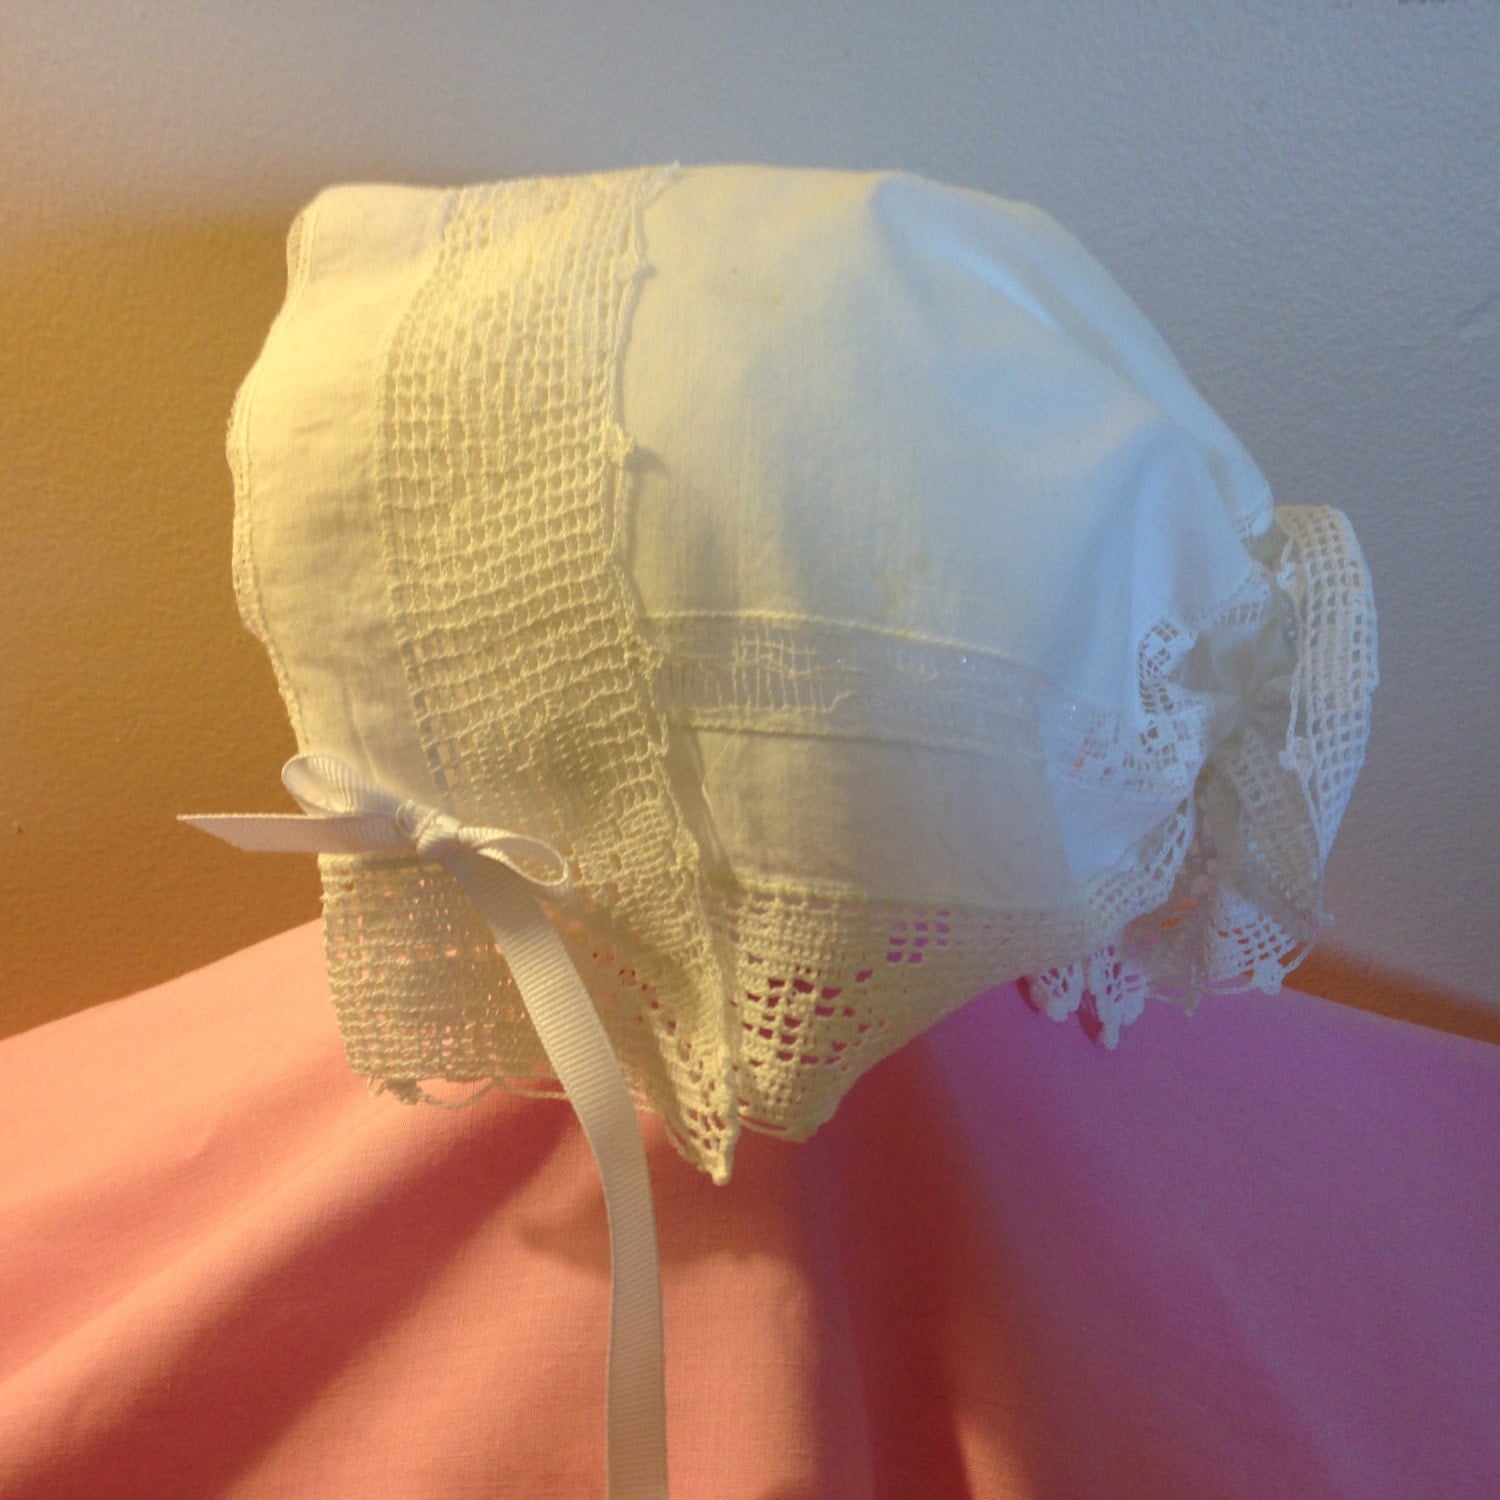 Newborn baby hat made from vintage handkerchief 3-6 mo size